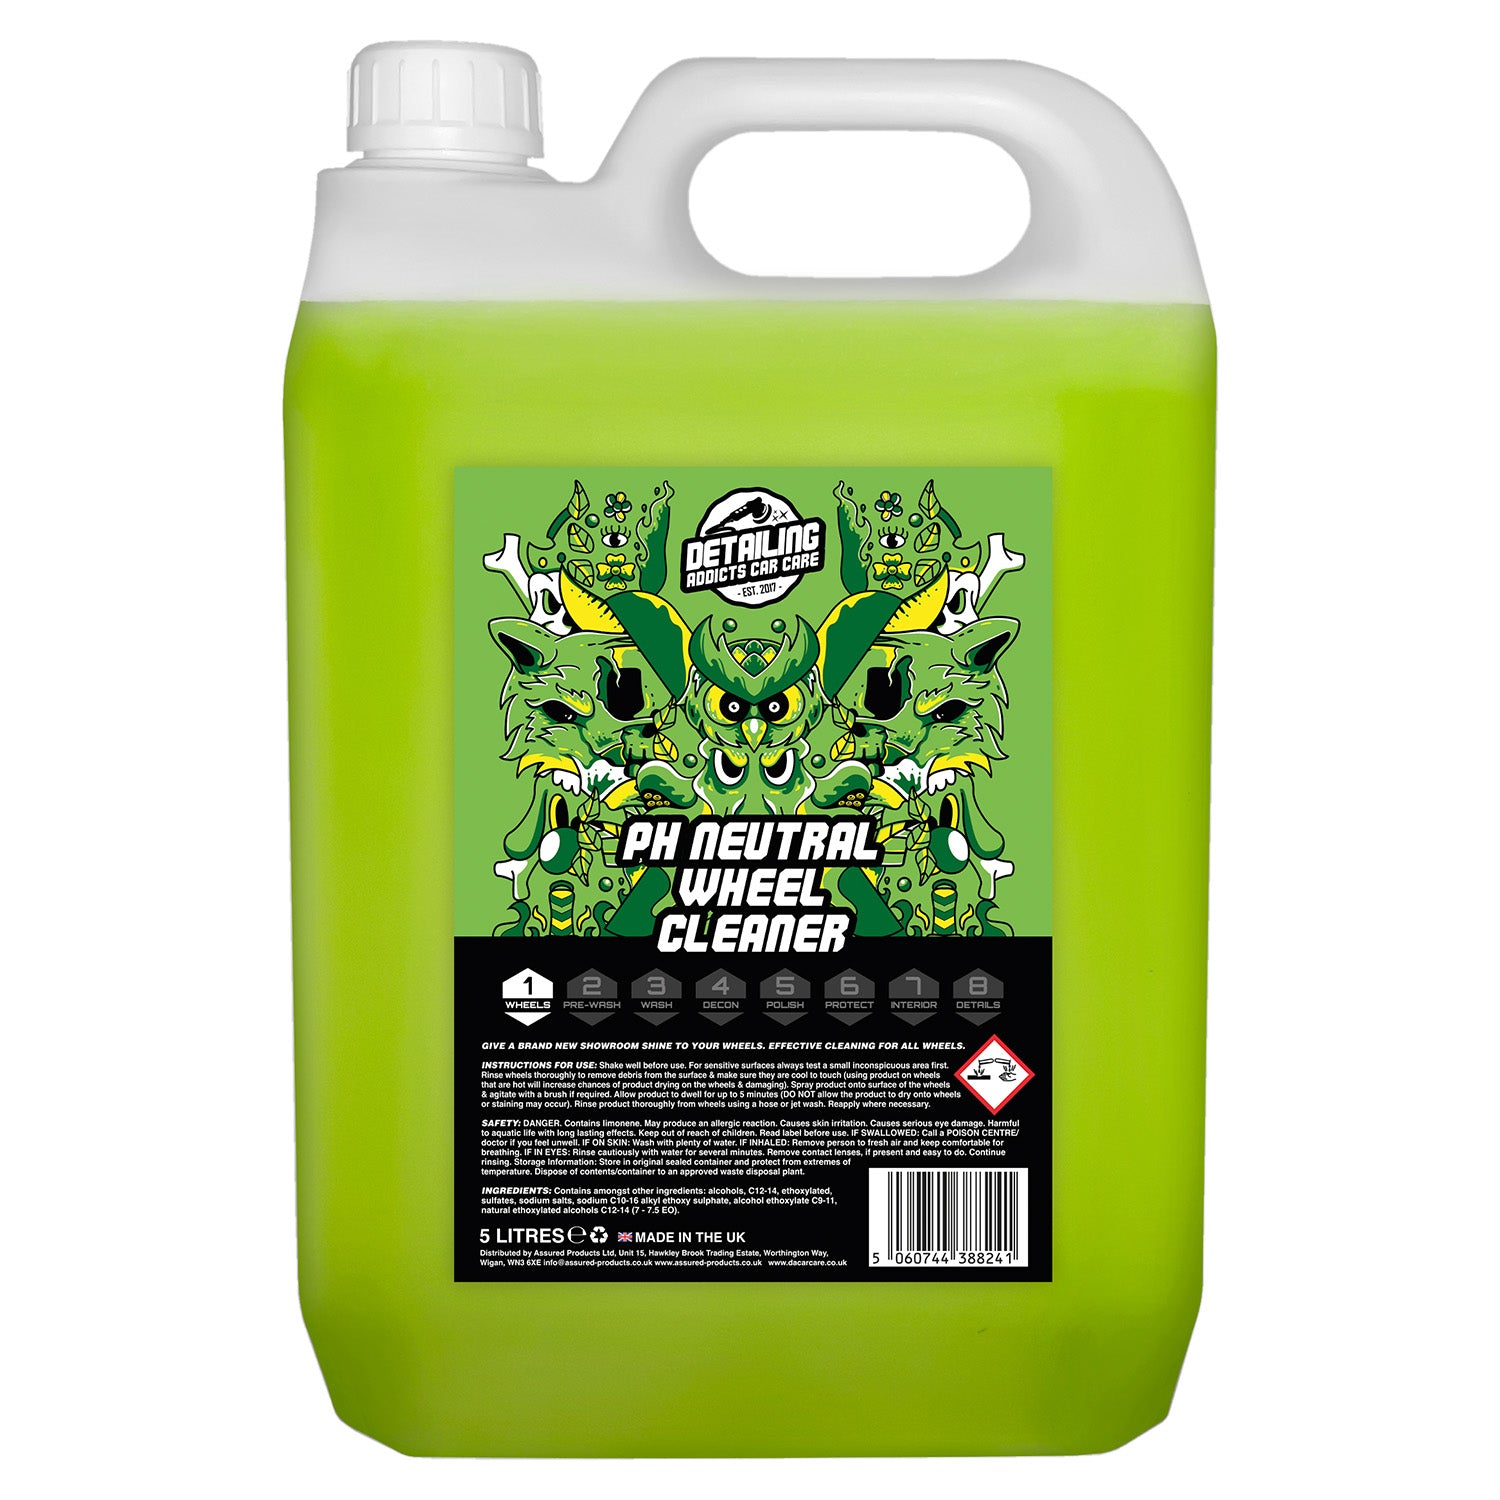 PH Neutral Wheel Cleaner 5L - Detailing Addicts